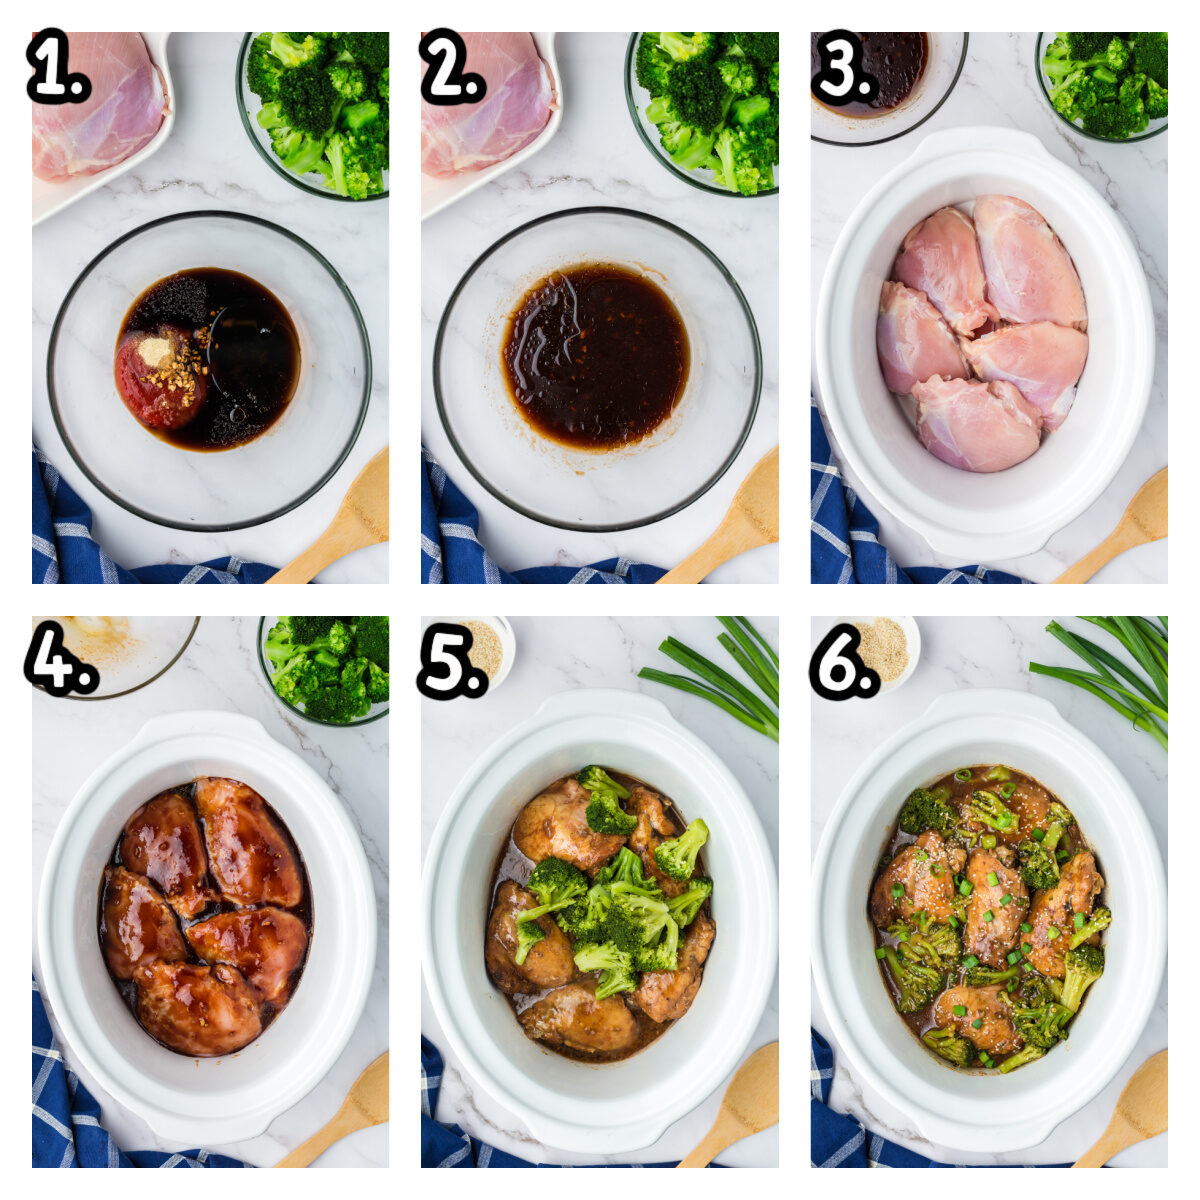 6 images showing how to make chicken and broccoli.